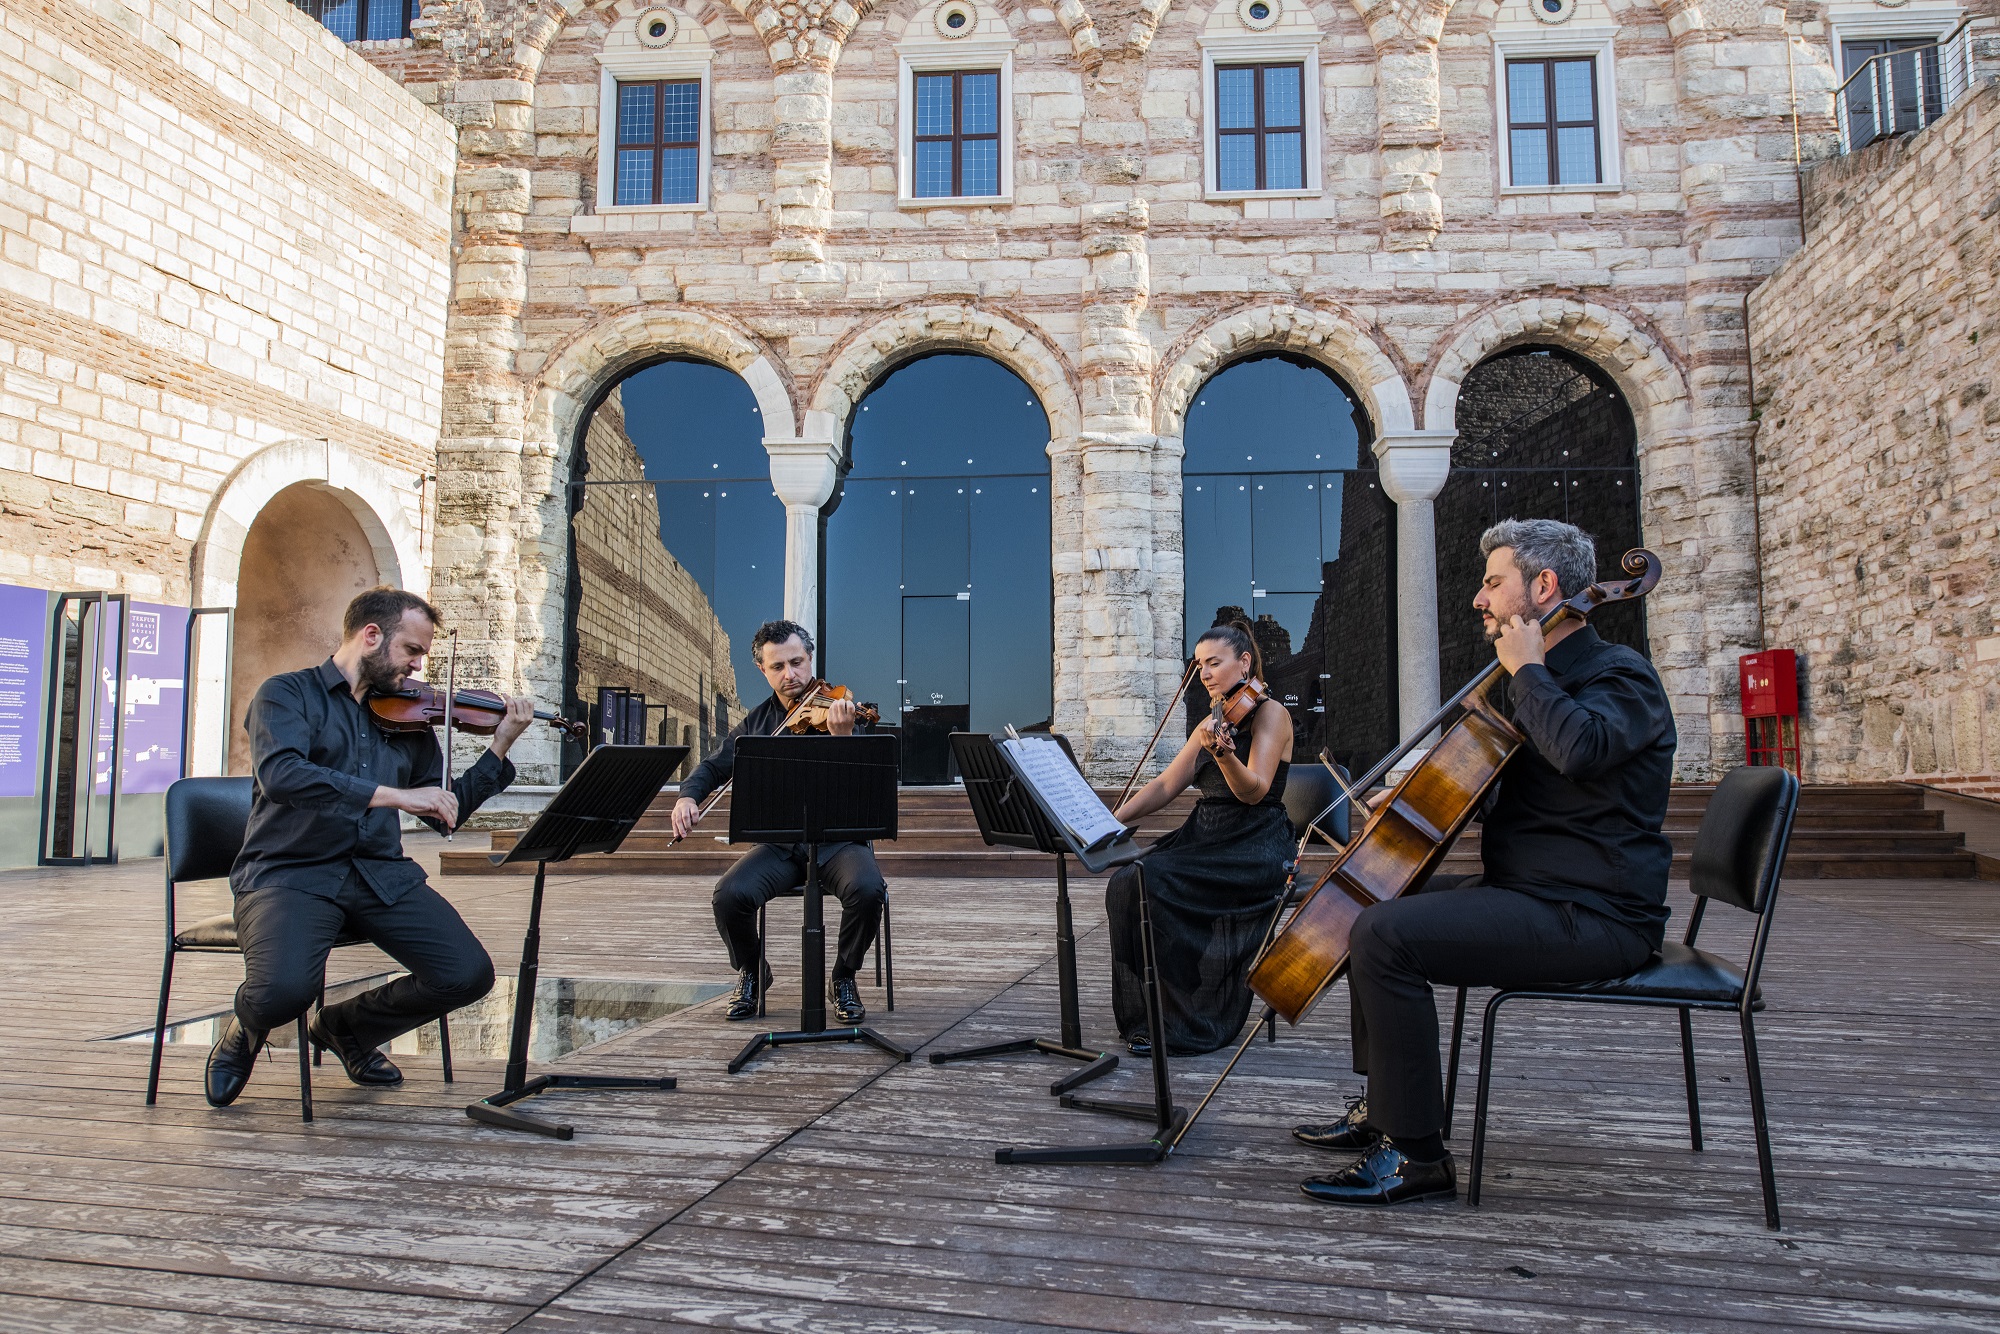 The Semplice Quartet in the courtyard of the Porphyrogenitus Palace, Istanbul